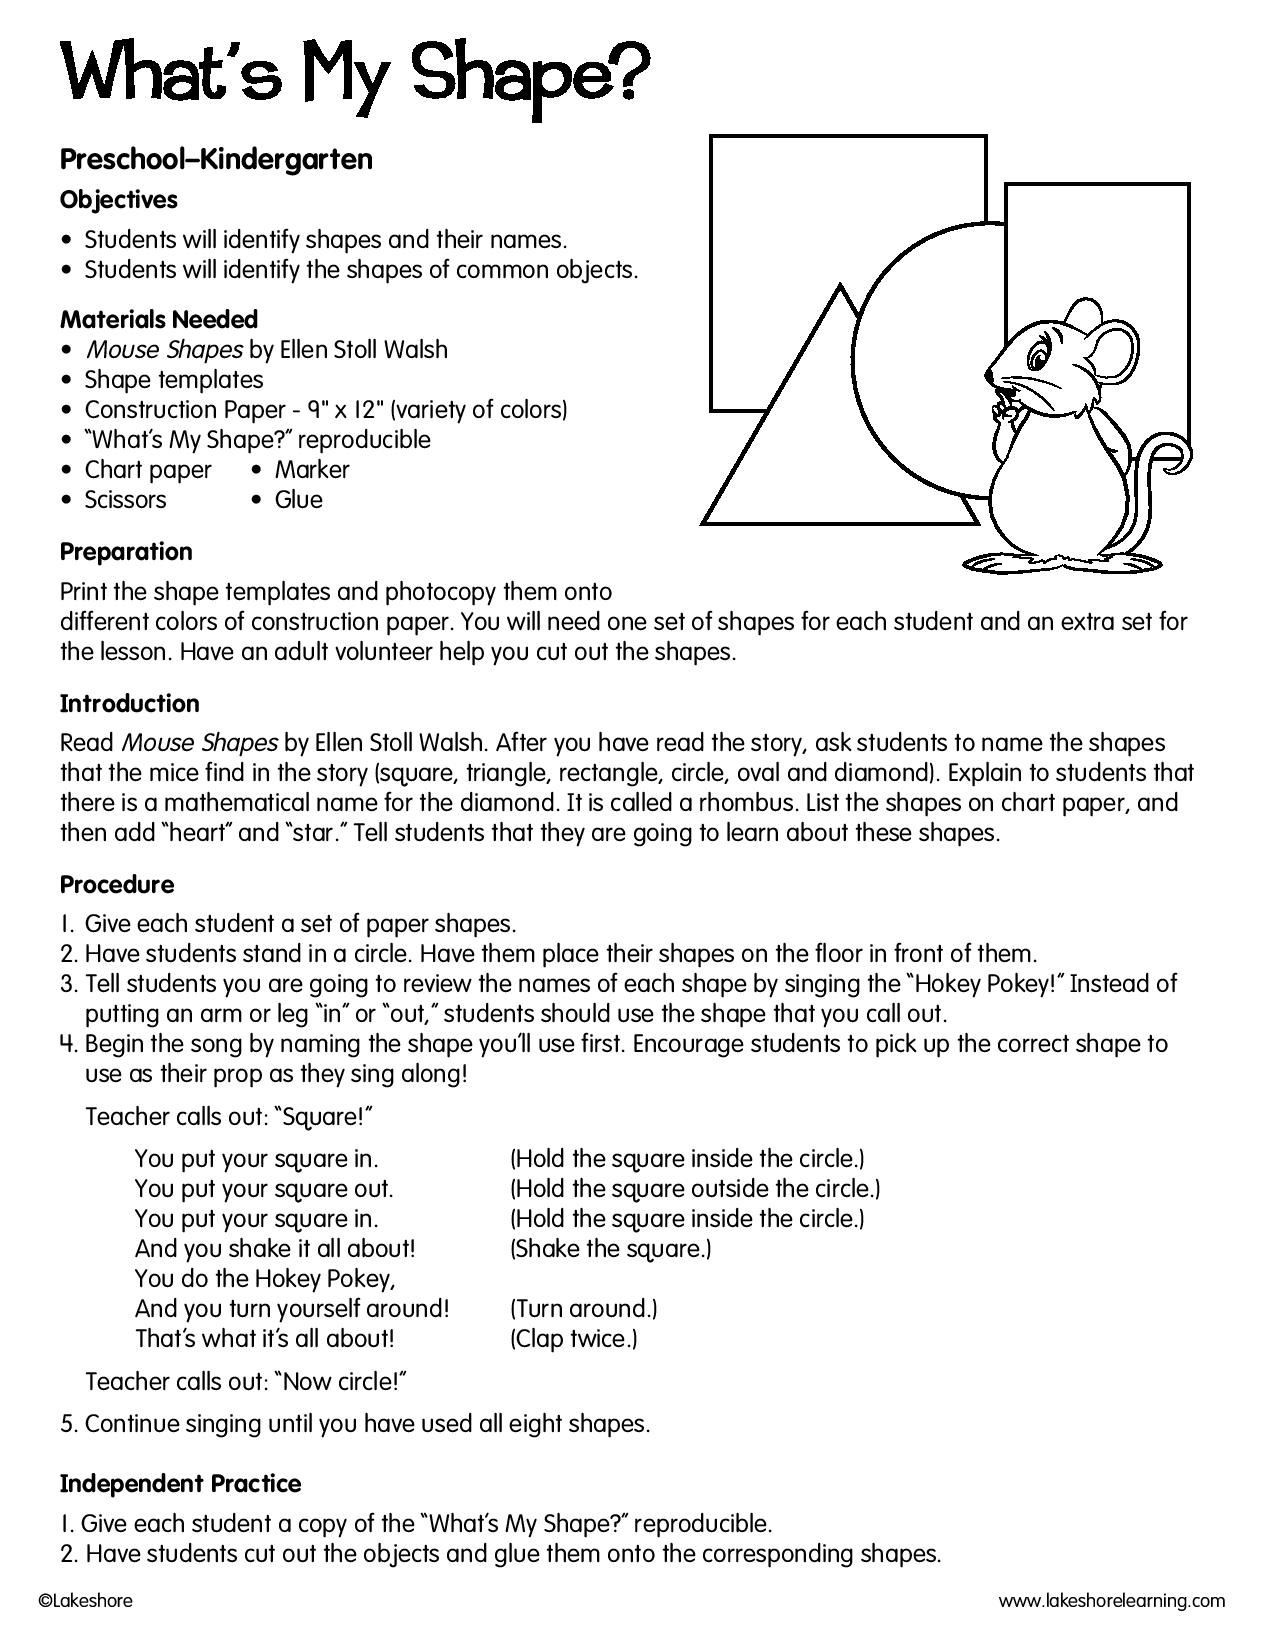 Shapes Lesson Plan What S My Shape Lessonplan